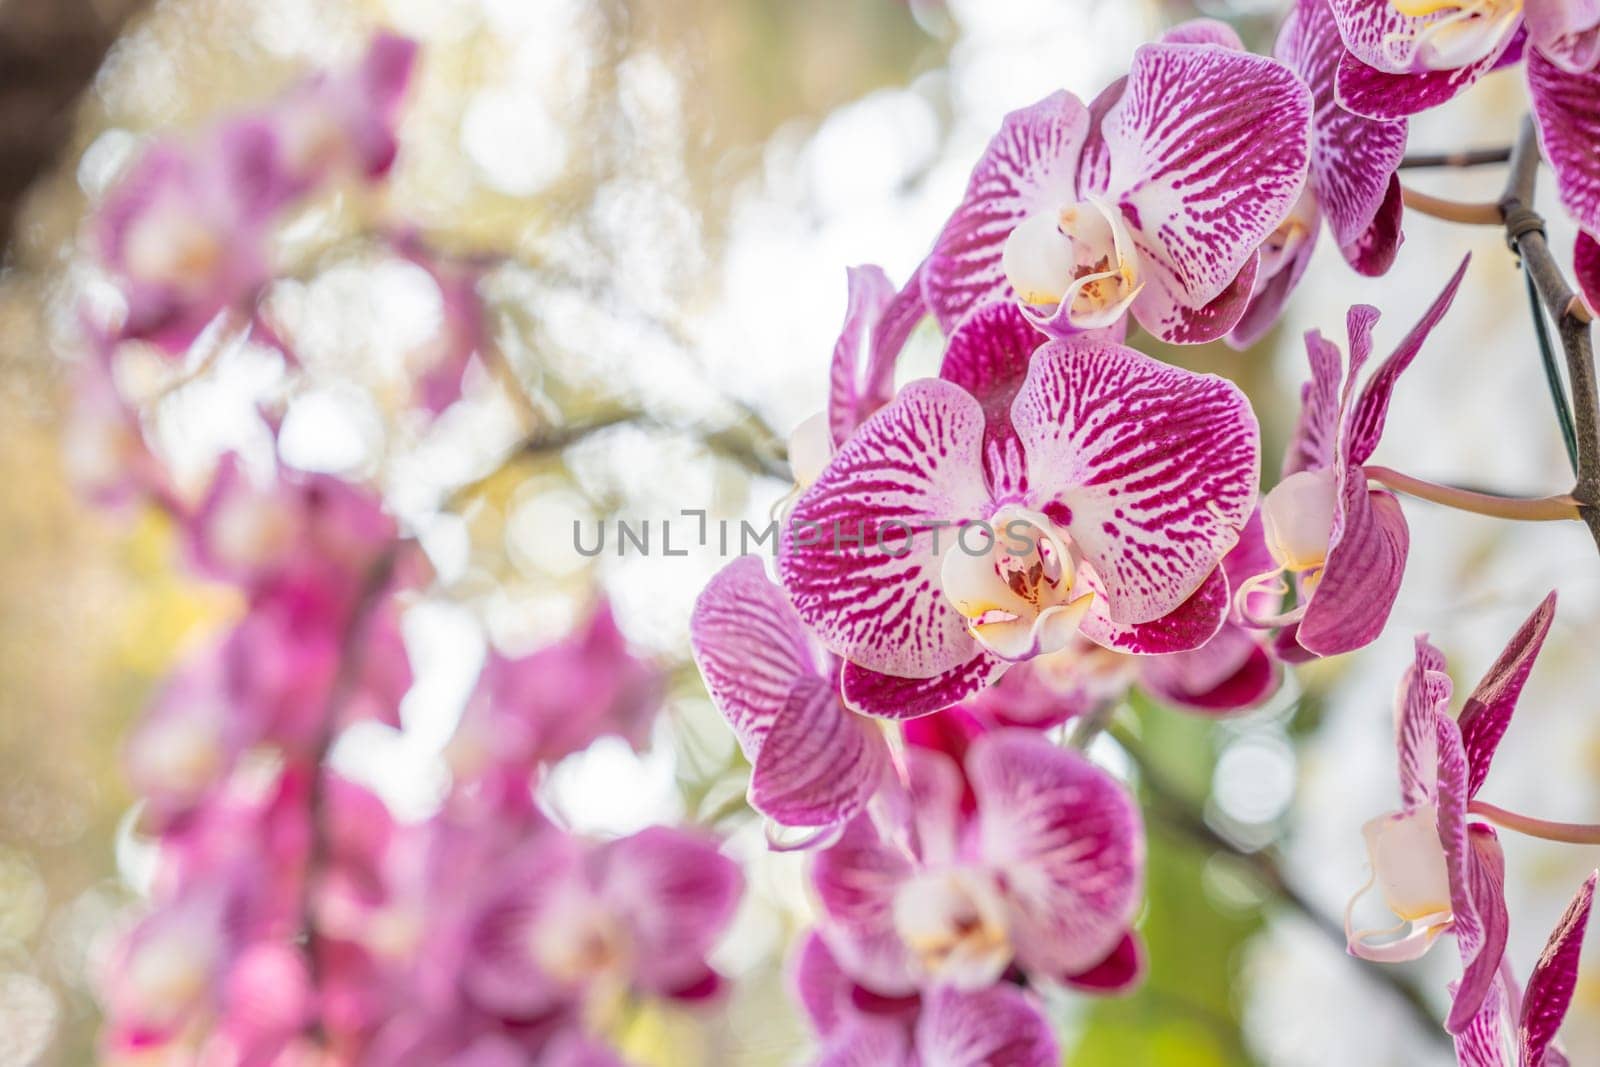 The Beautiful Phalaenopsis Orchid flower blooming in garden floral background by Gamjai